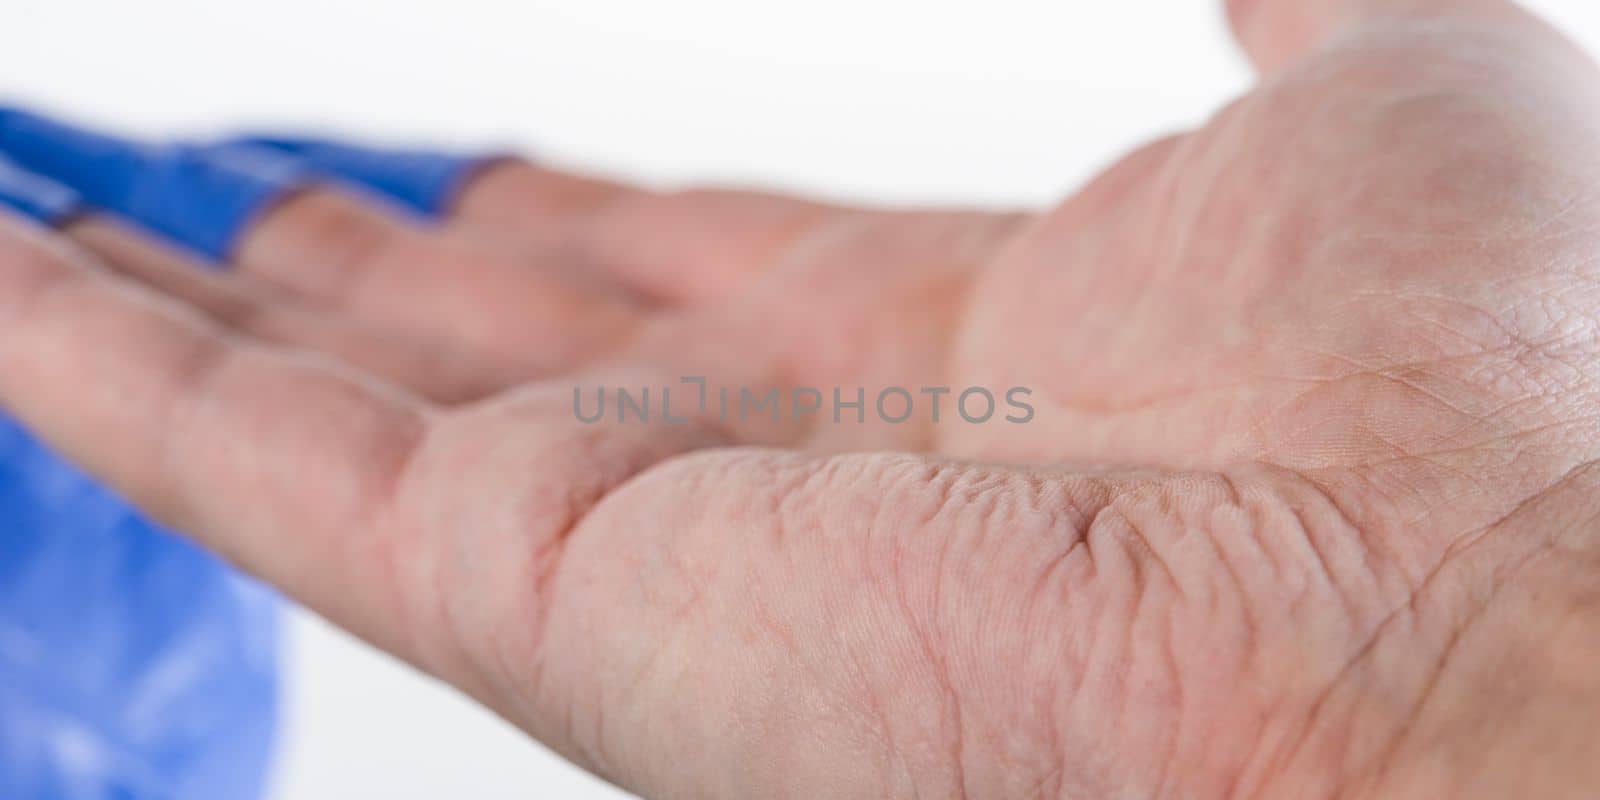 The doctor takes off his blue rubber gloves, the skin on his hands is wrinkled from moisture. Wrinkled fingers after wearing rubber gloves for a long time. by SERSOL